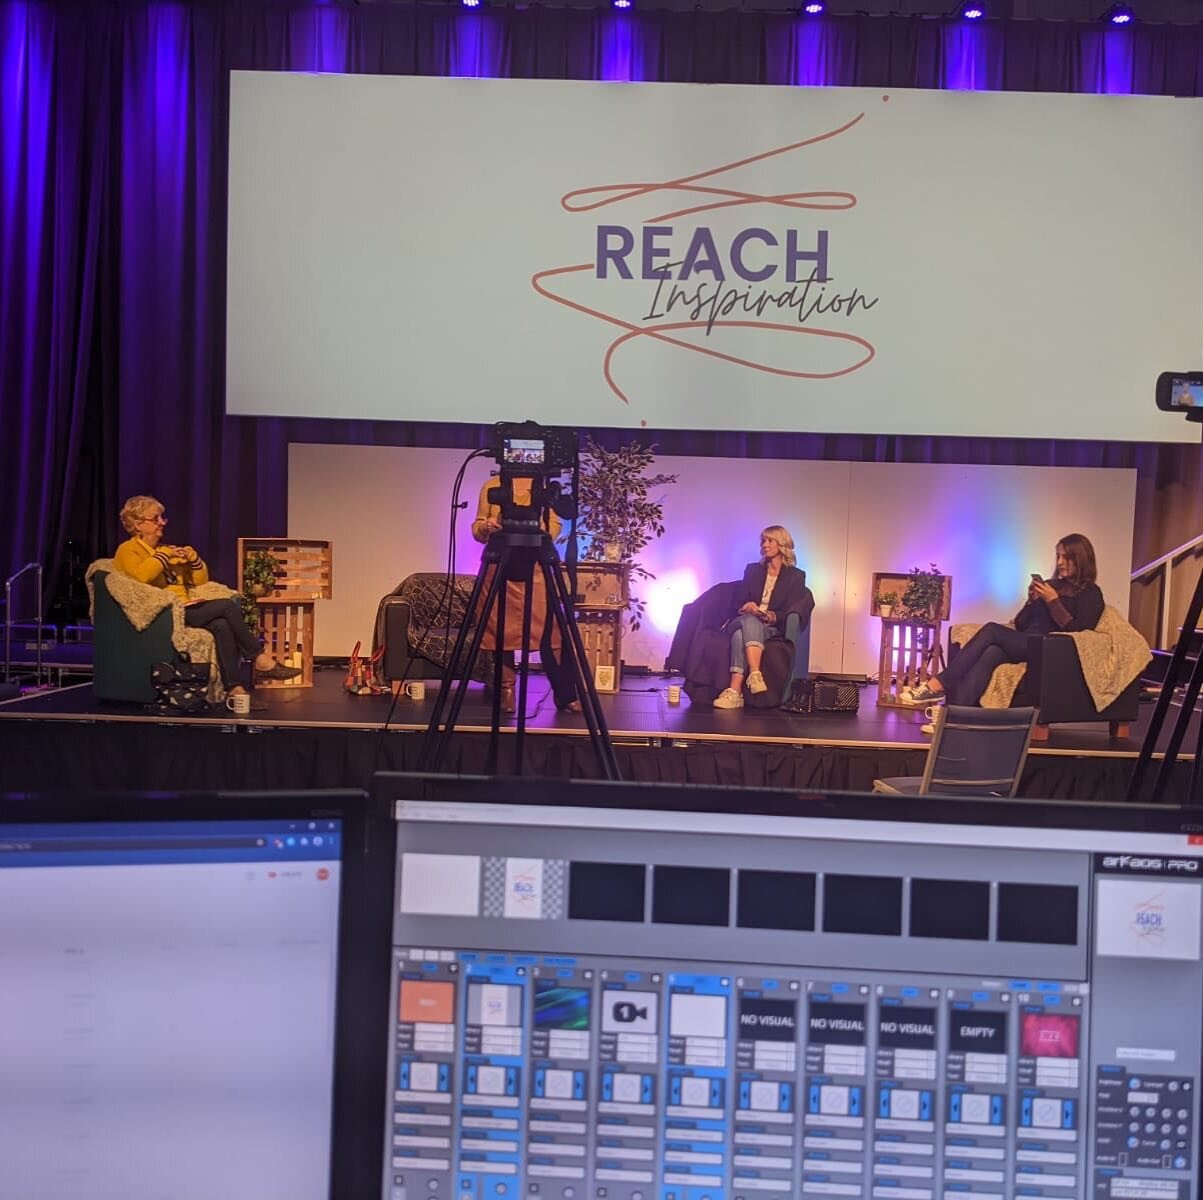 Had a great day at the Reach Inspiration Women&rsquo;s Conference today - many thanks to all who took part to make it happen #onechurchmanyplaces #faith #family #fun